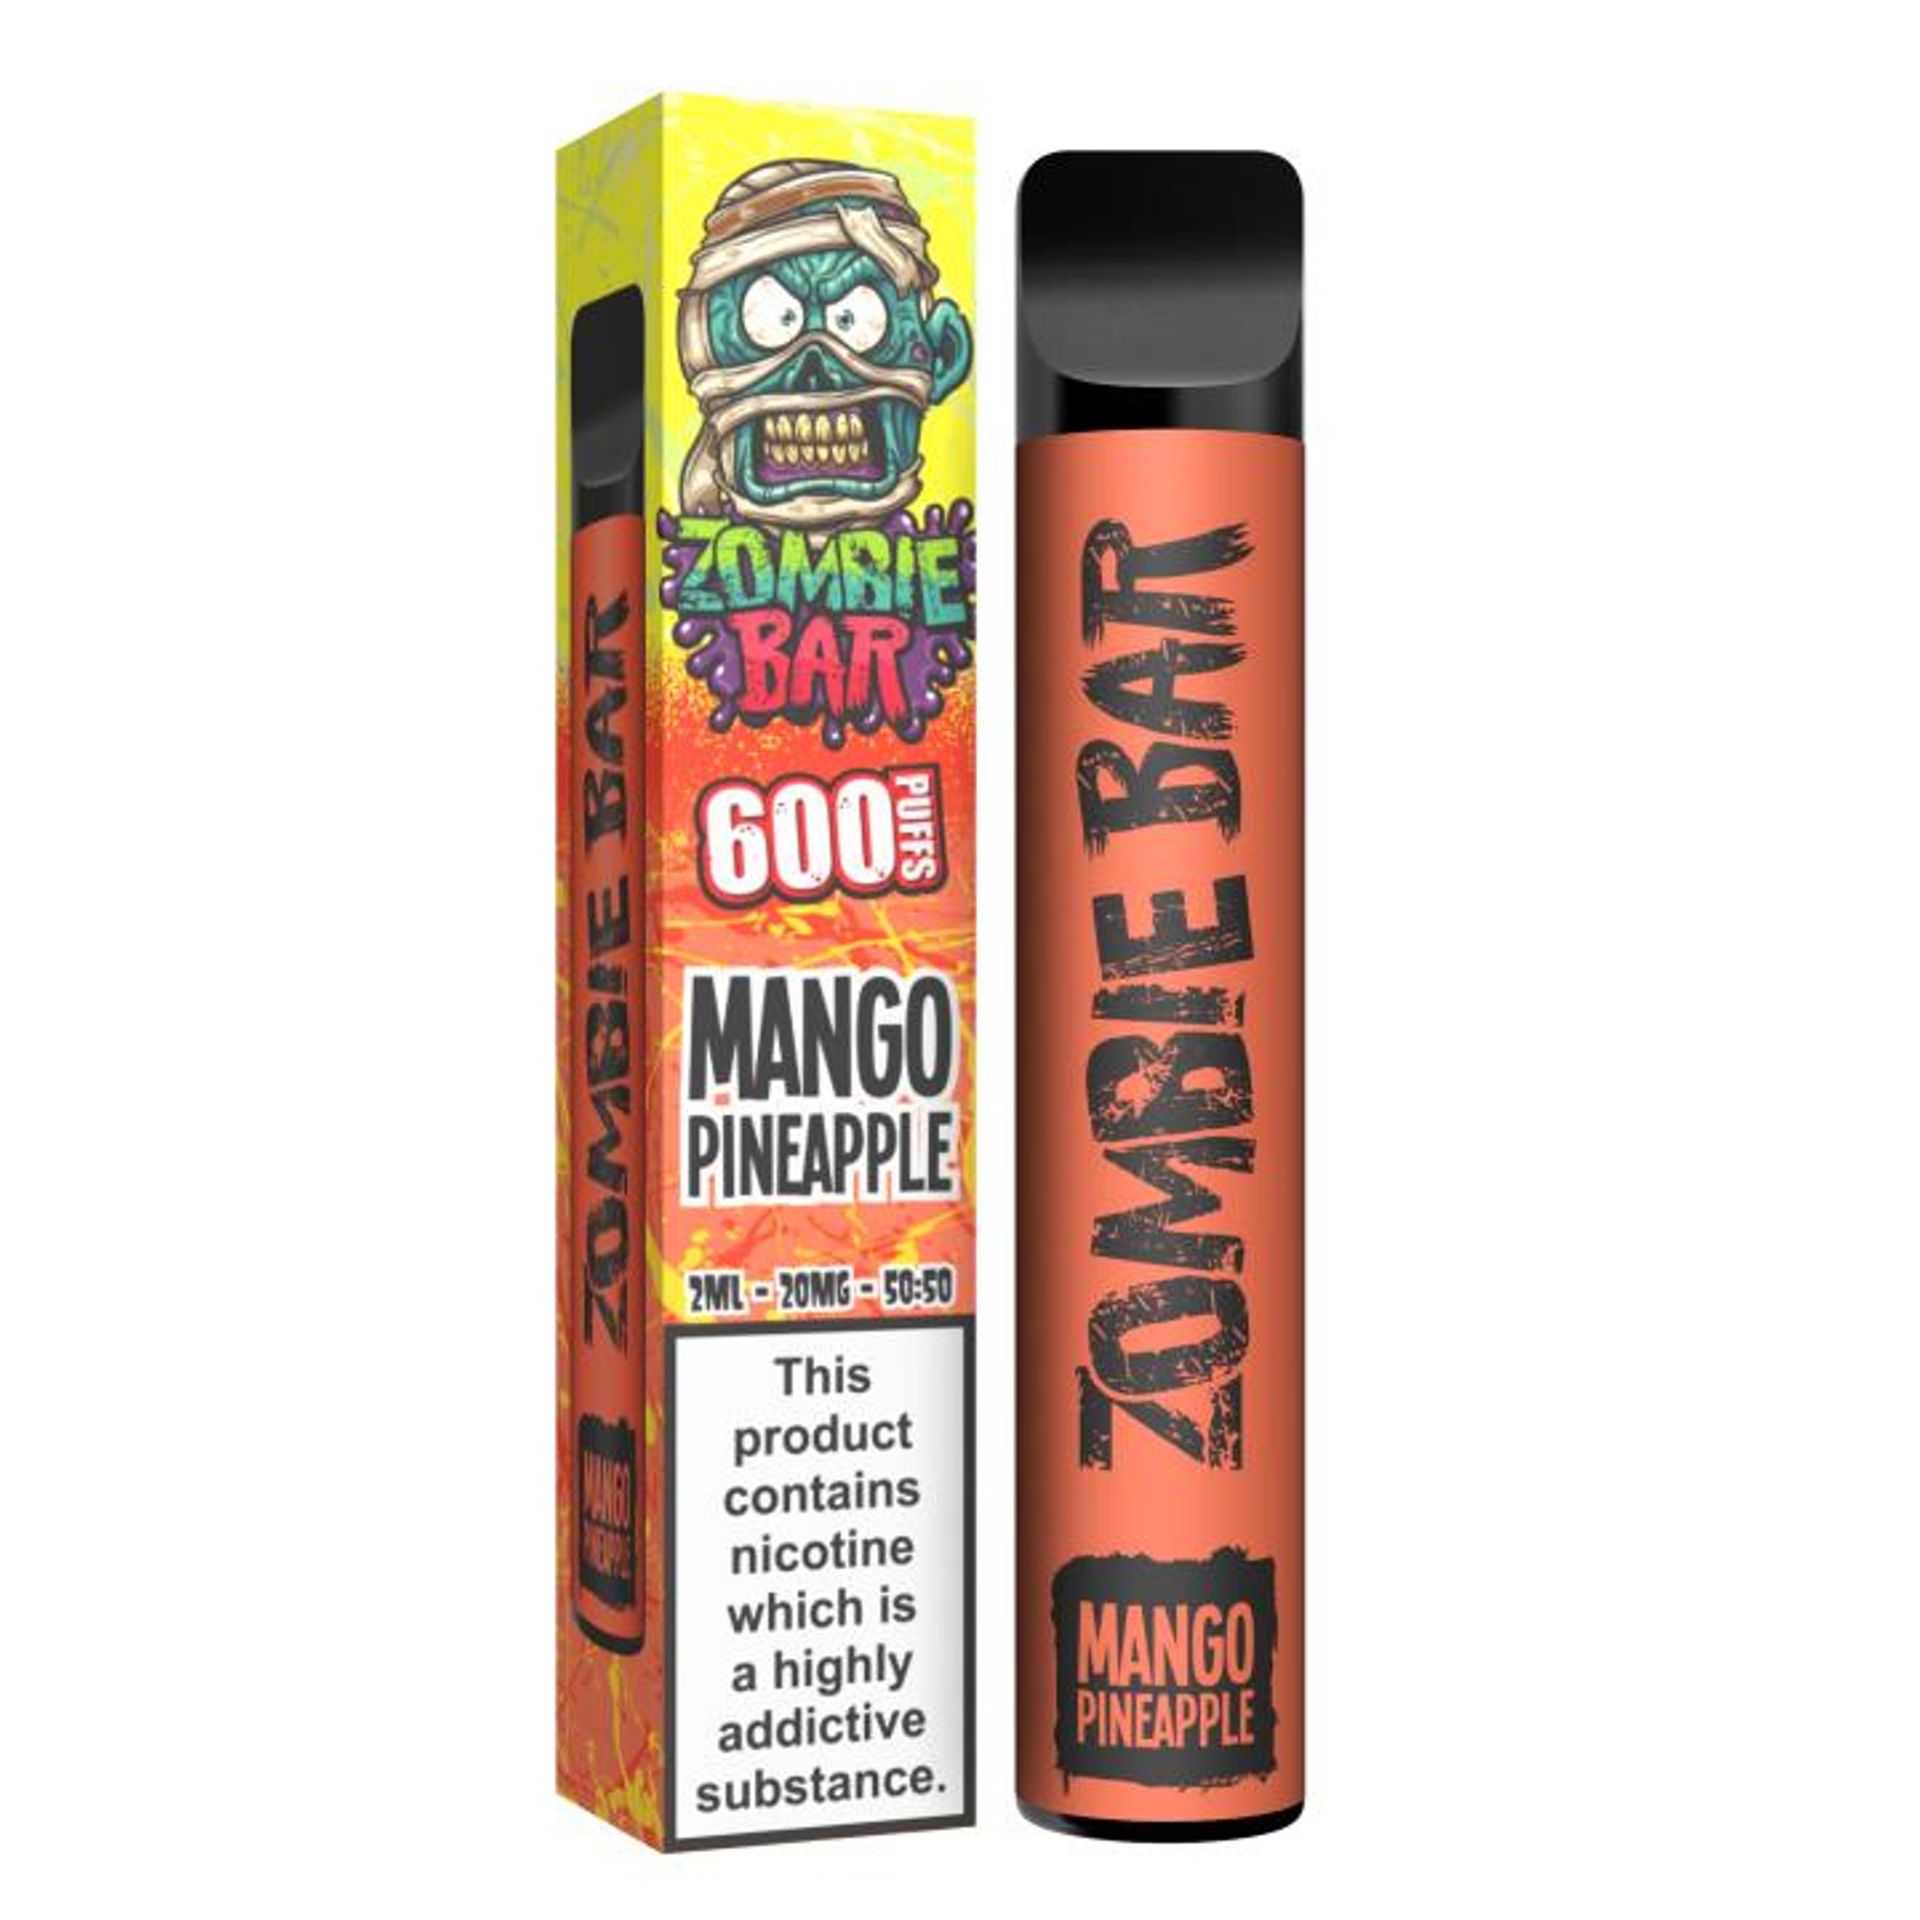 Image of Mango Pineapple by Zombie Bar